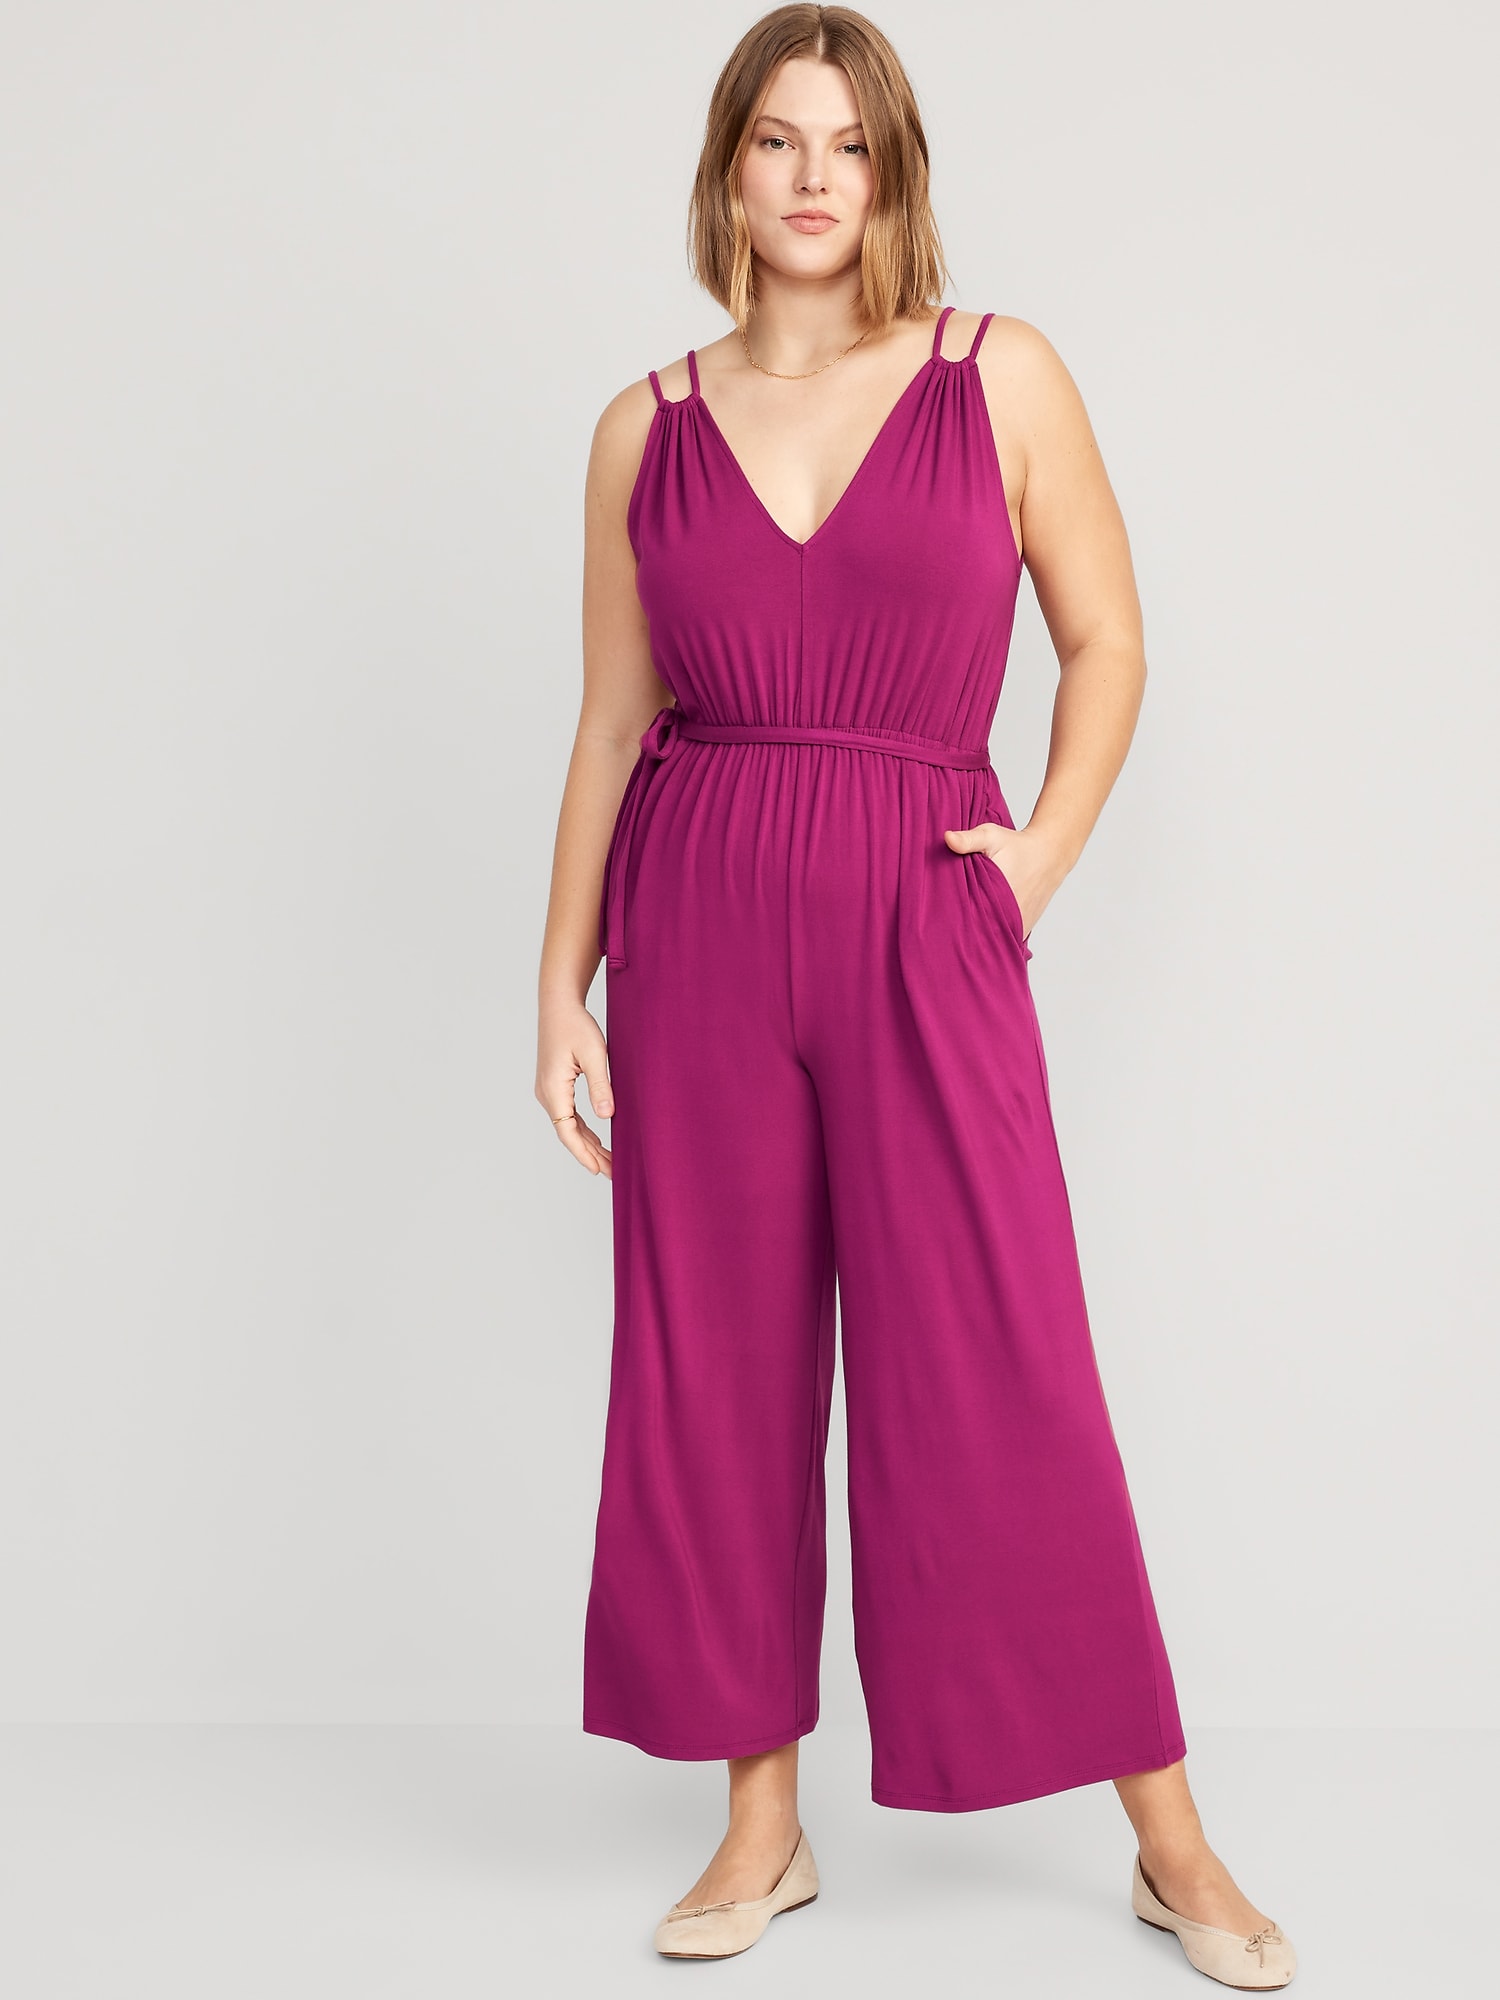 Sleeveless Double-Strap Ankle-Length Jumpsuit for Women | Old Navy